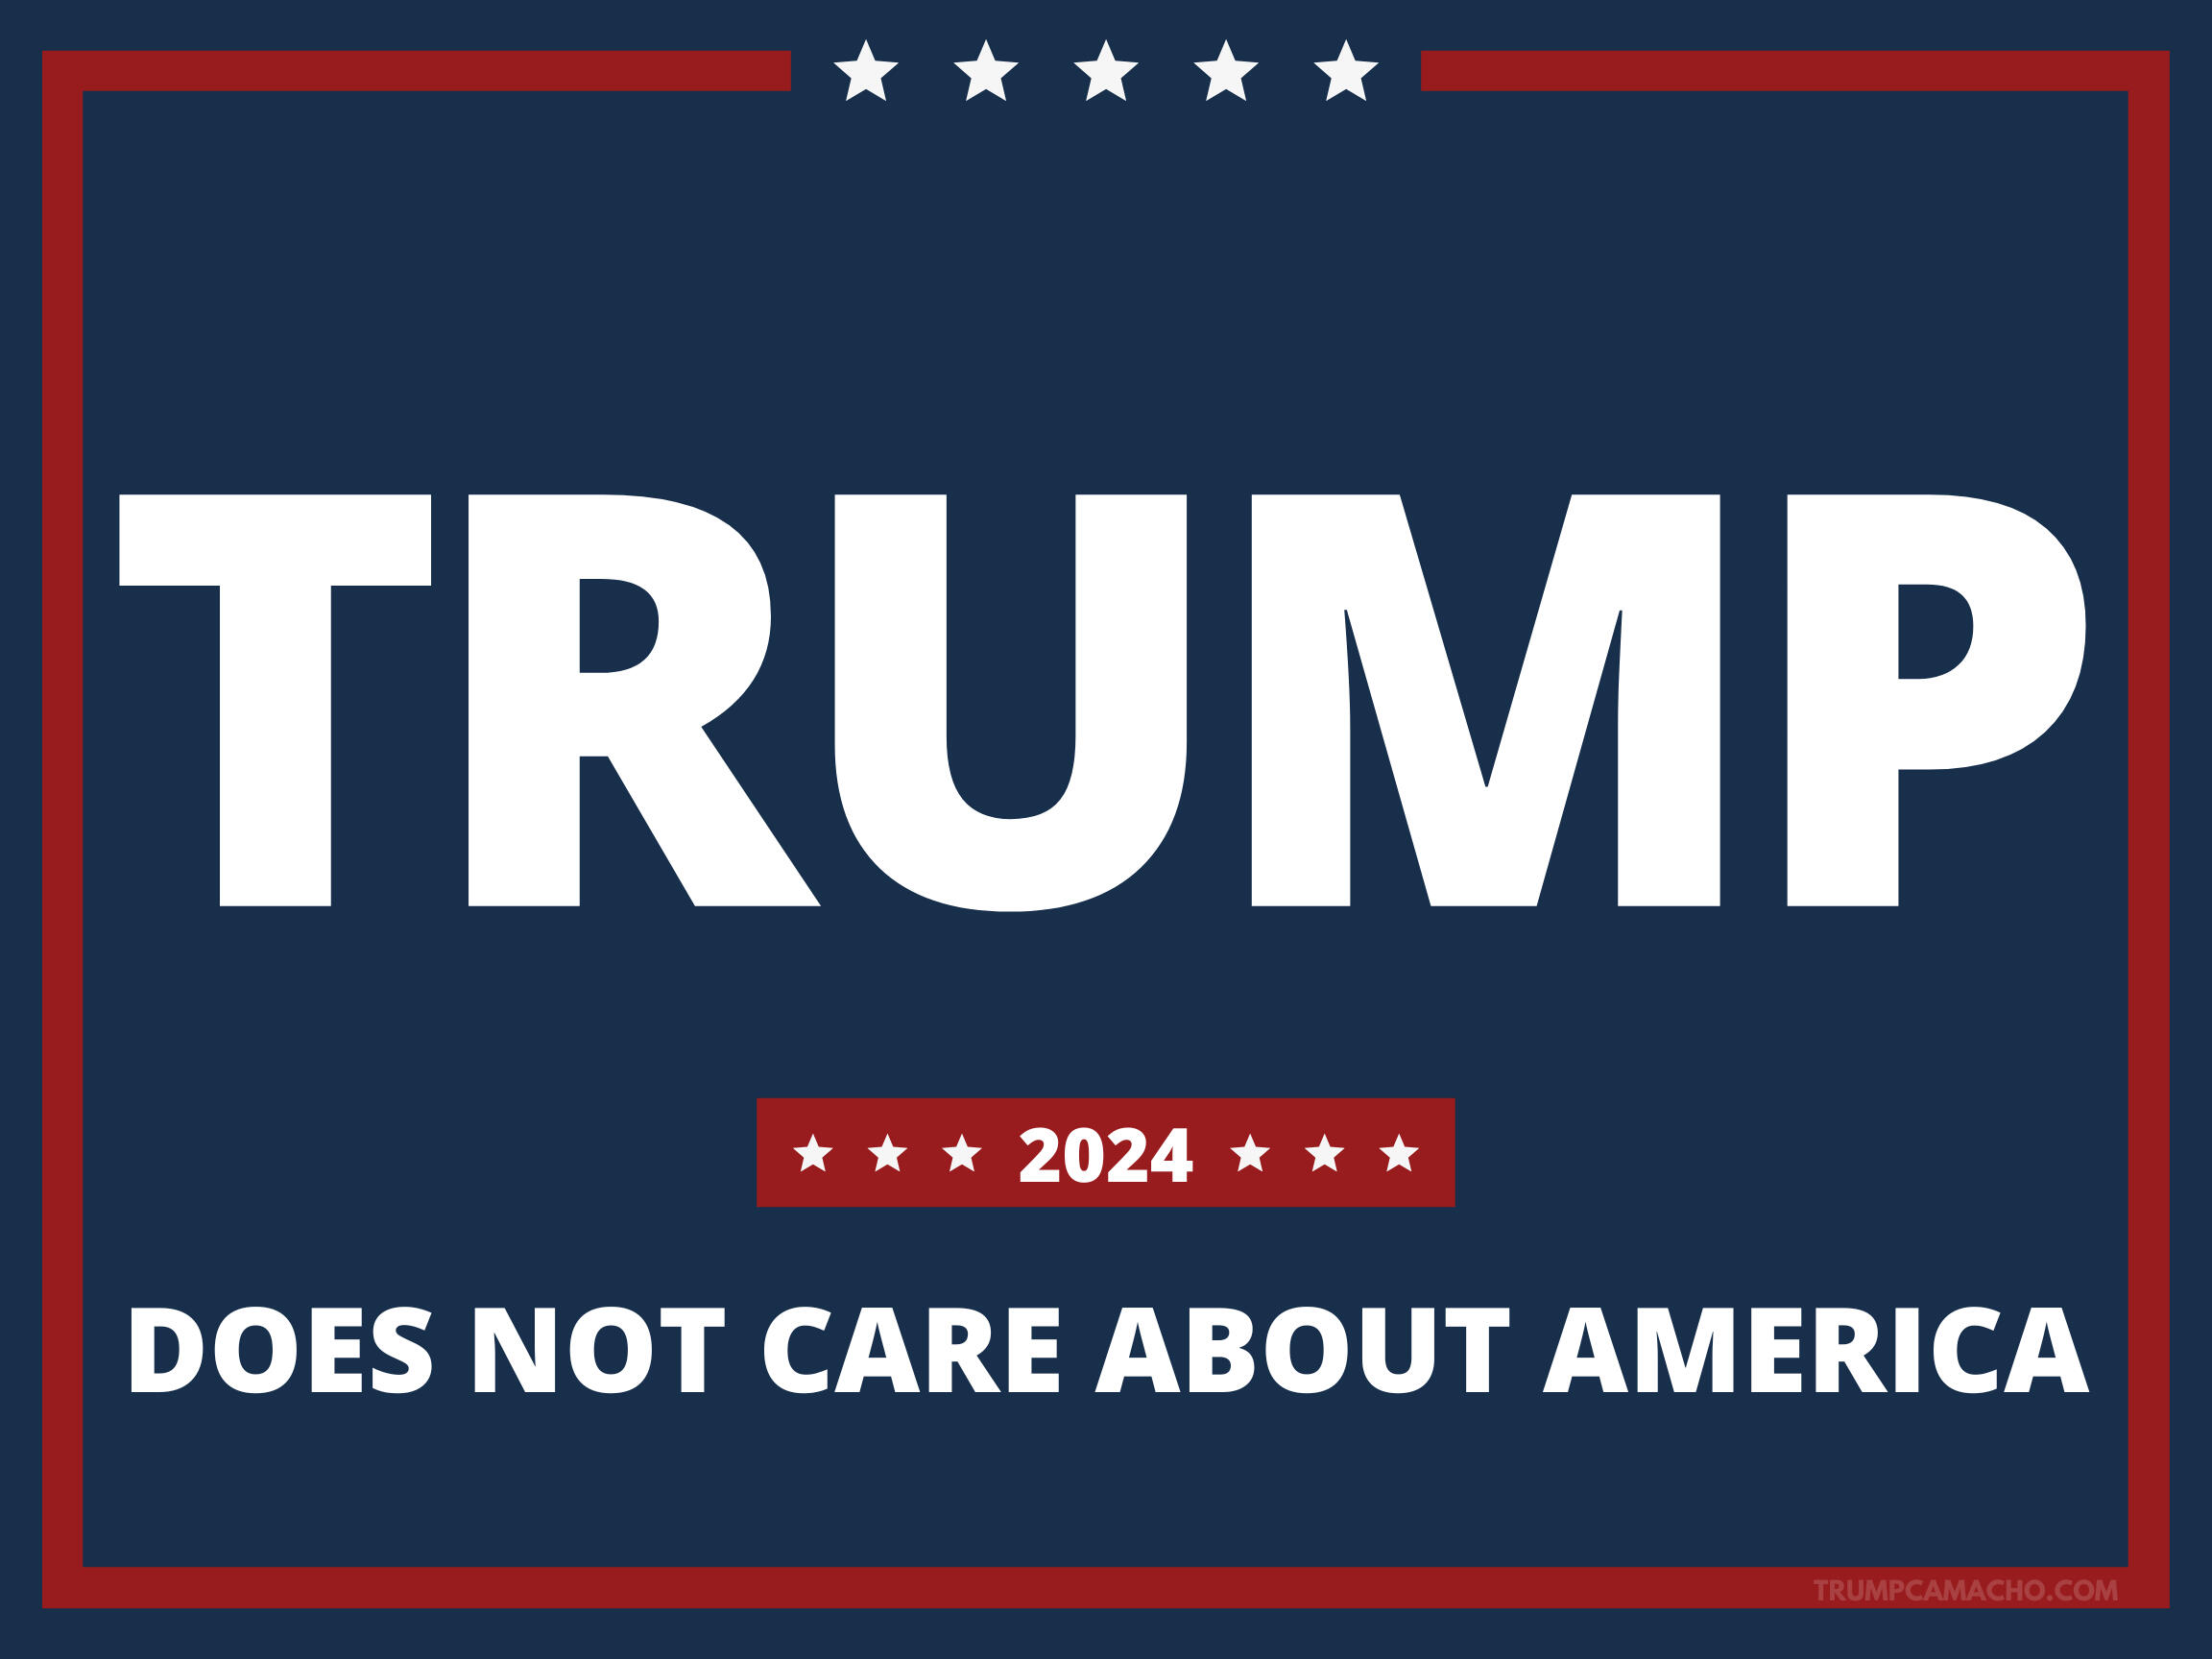 Trump does not care about America. Trump 2024 campaign poster.